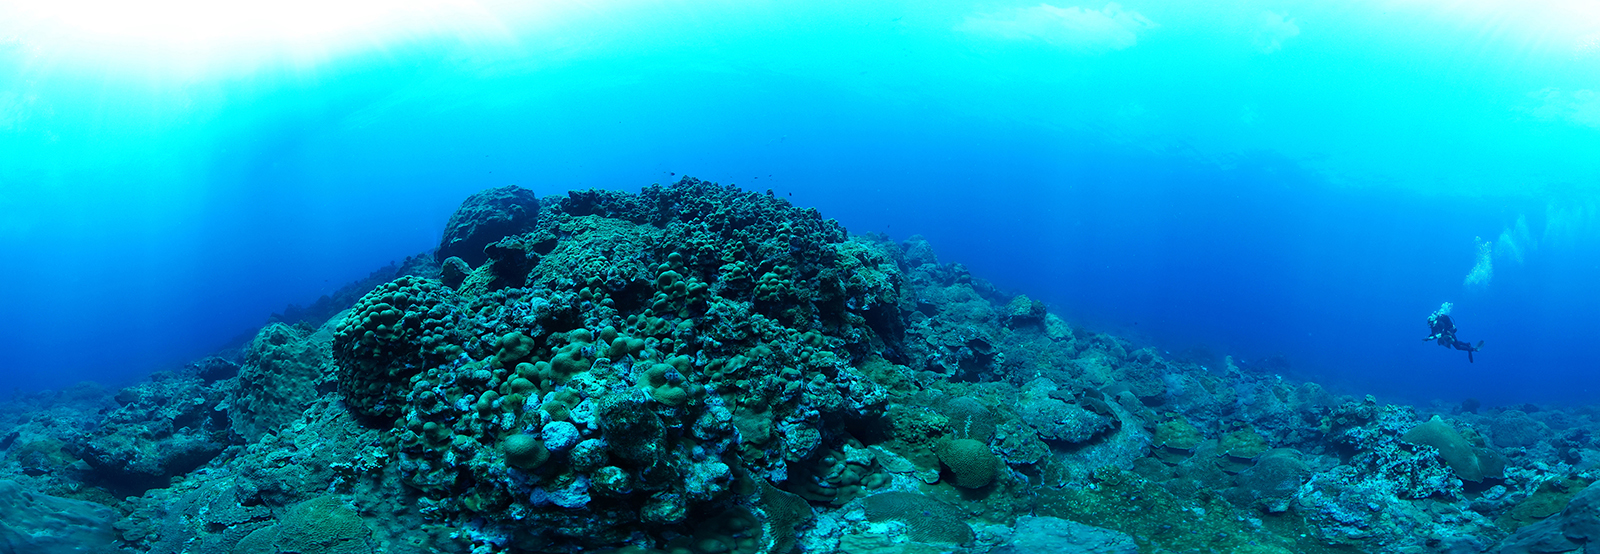 A panoramic underwater photo of healthy corals covering a reef